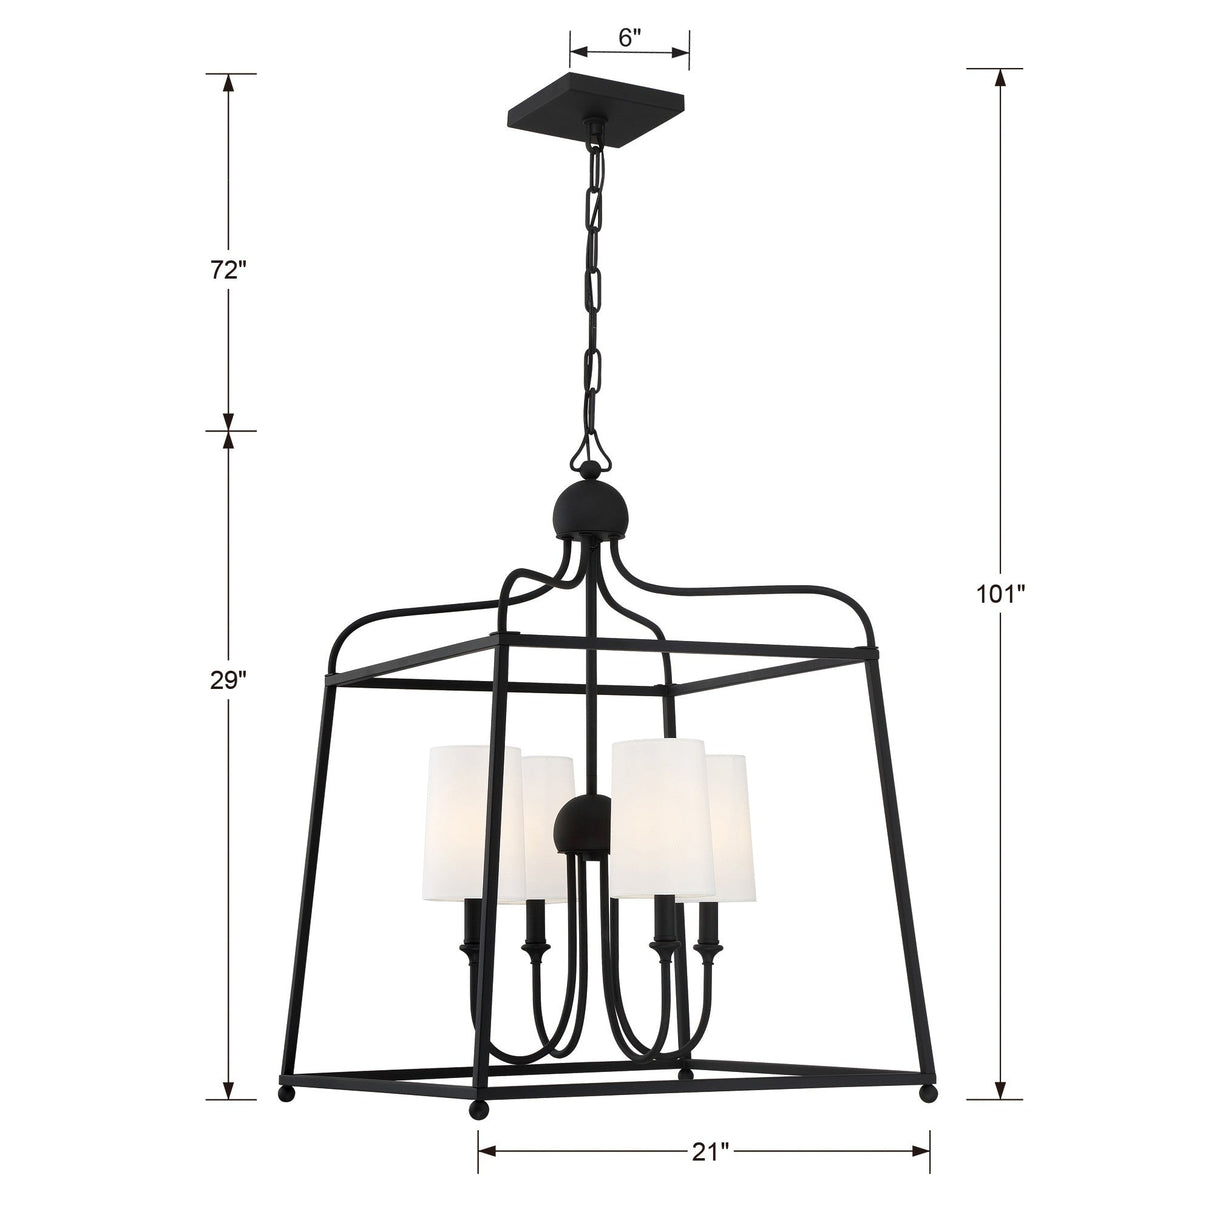 Libby Langdon for Crystorama Sylvan 4 Light Black Forged Chandelier 2244-BF